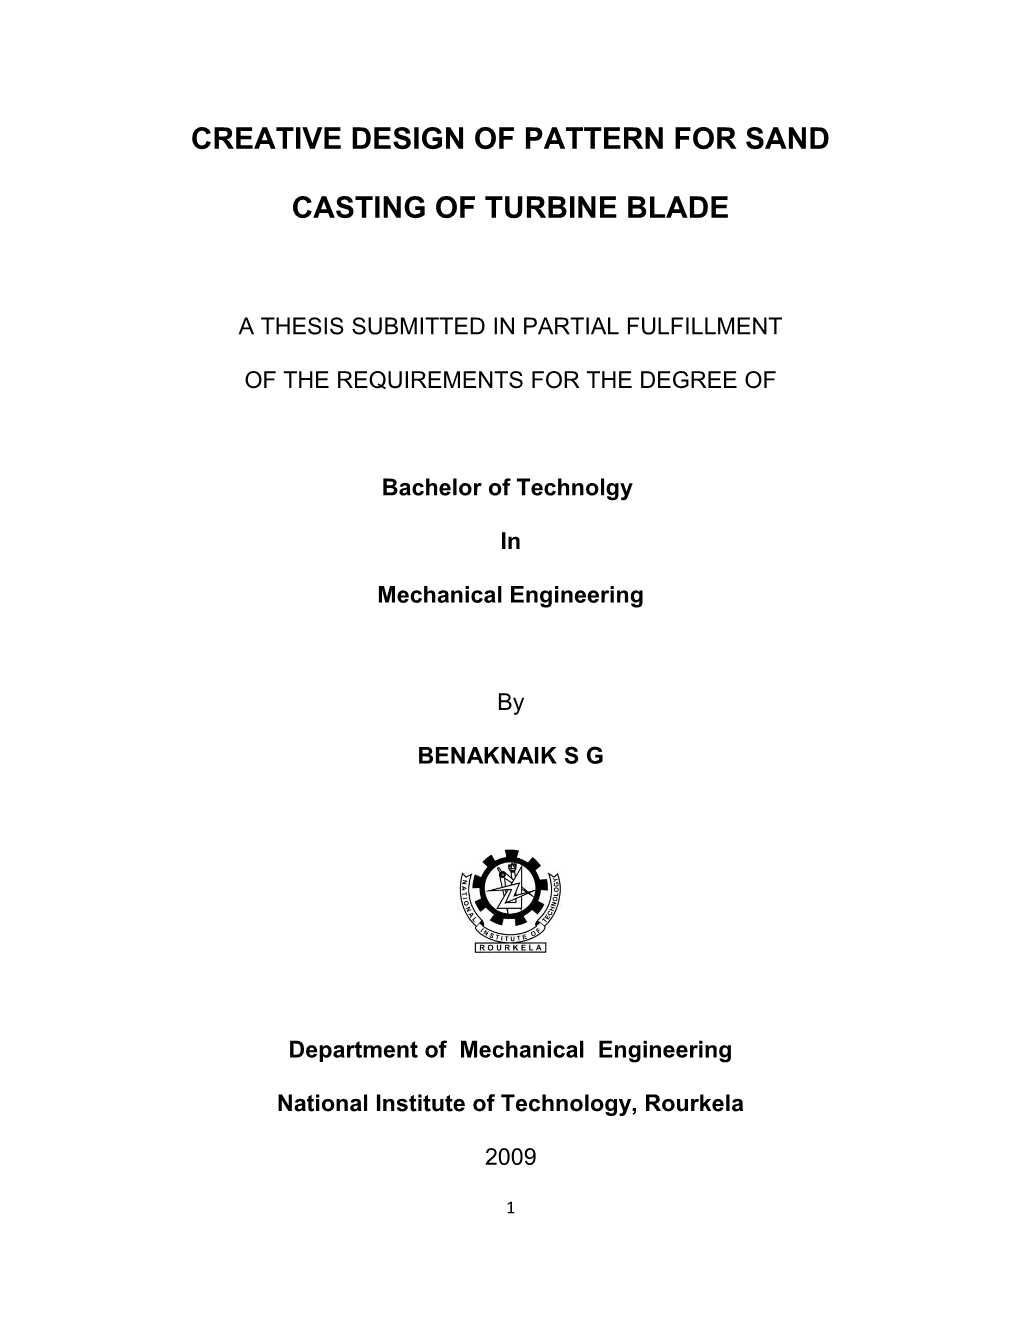 Creative Design of Pattern for Sand Casting of Turbine Blade